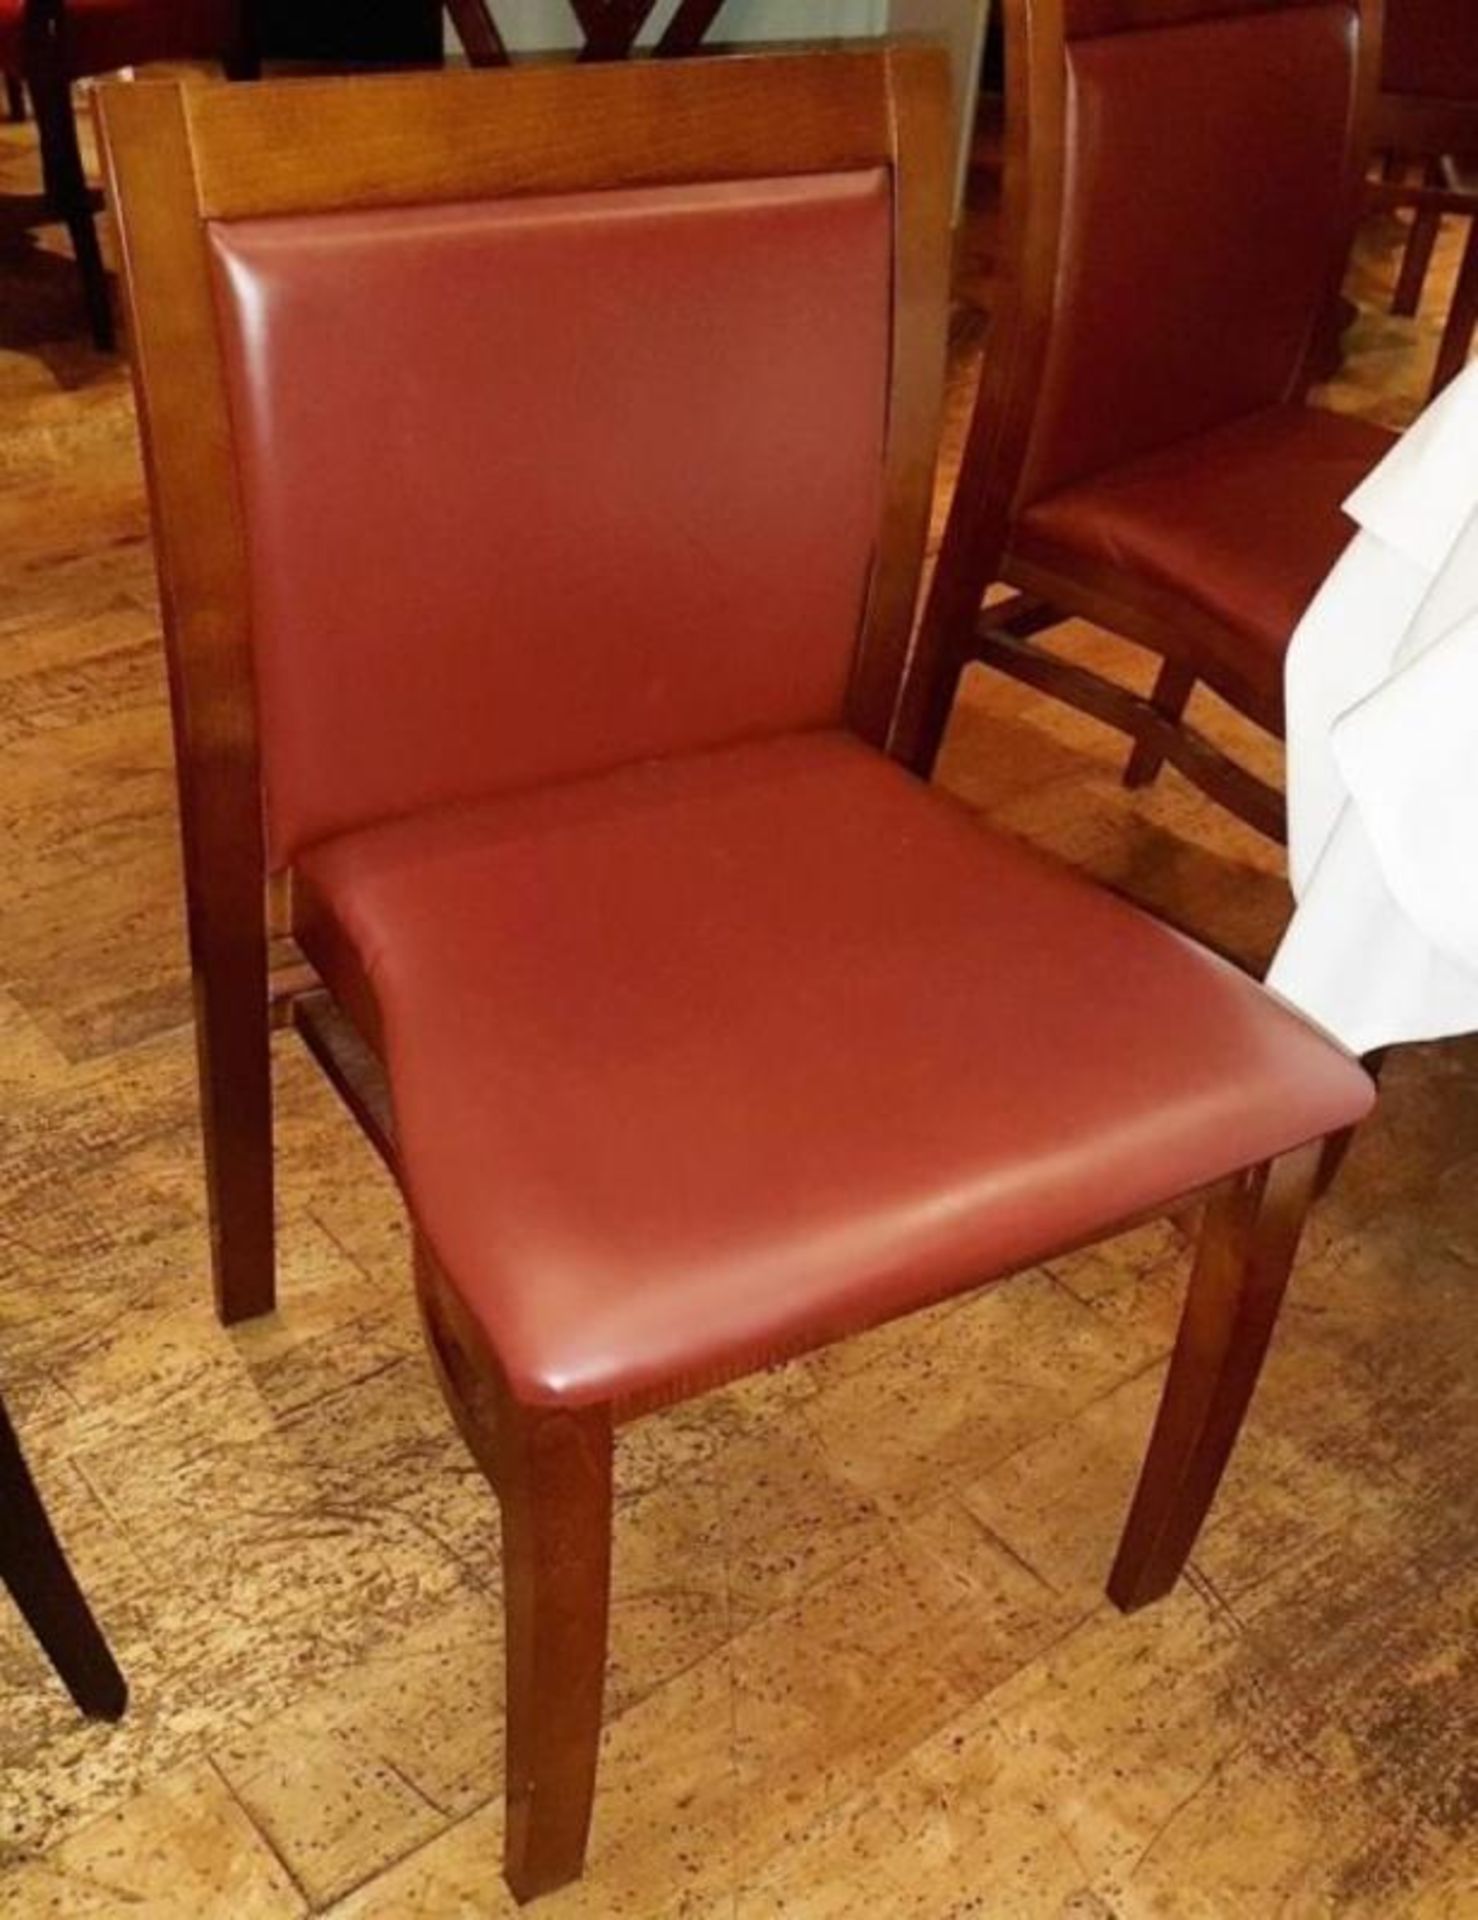 12 x Burgundy Faux Leather Dining Chairs With Wide Cushioned Seats - CL297 - Various Conditions - Re